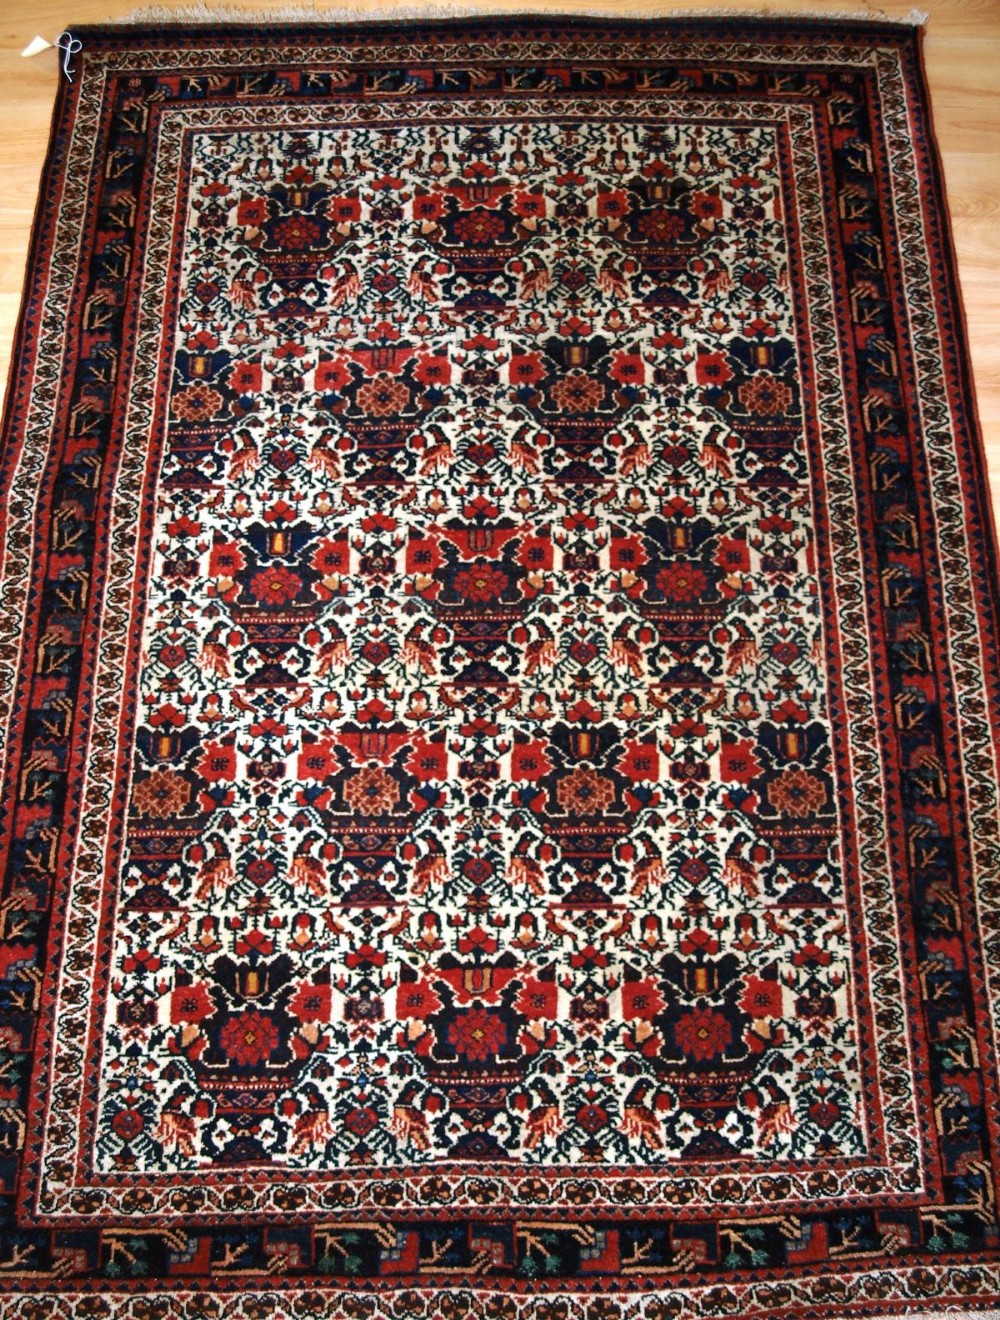 antique abedeh rug ivory ground with vase peacock design circa 190020